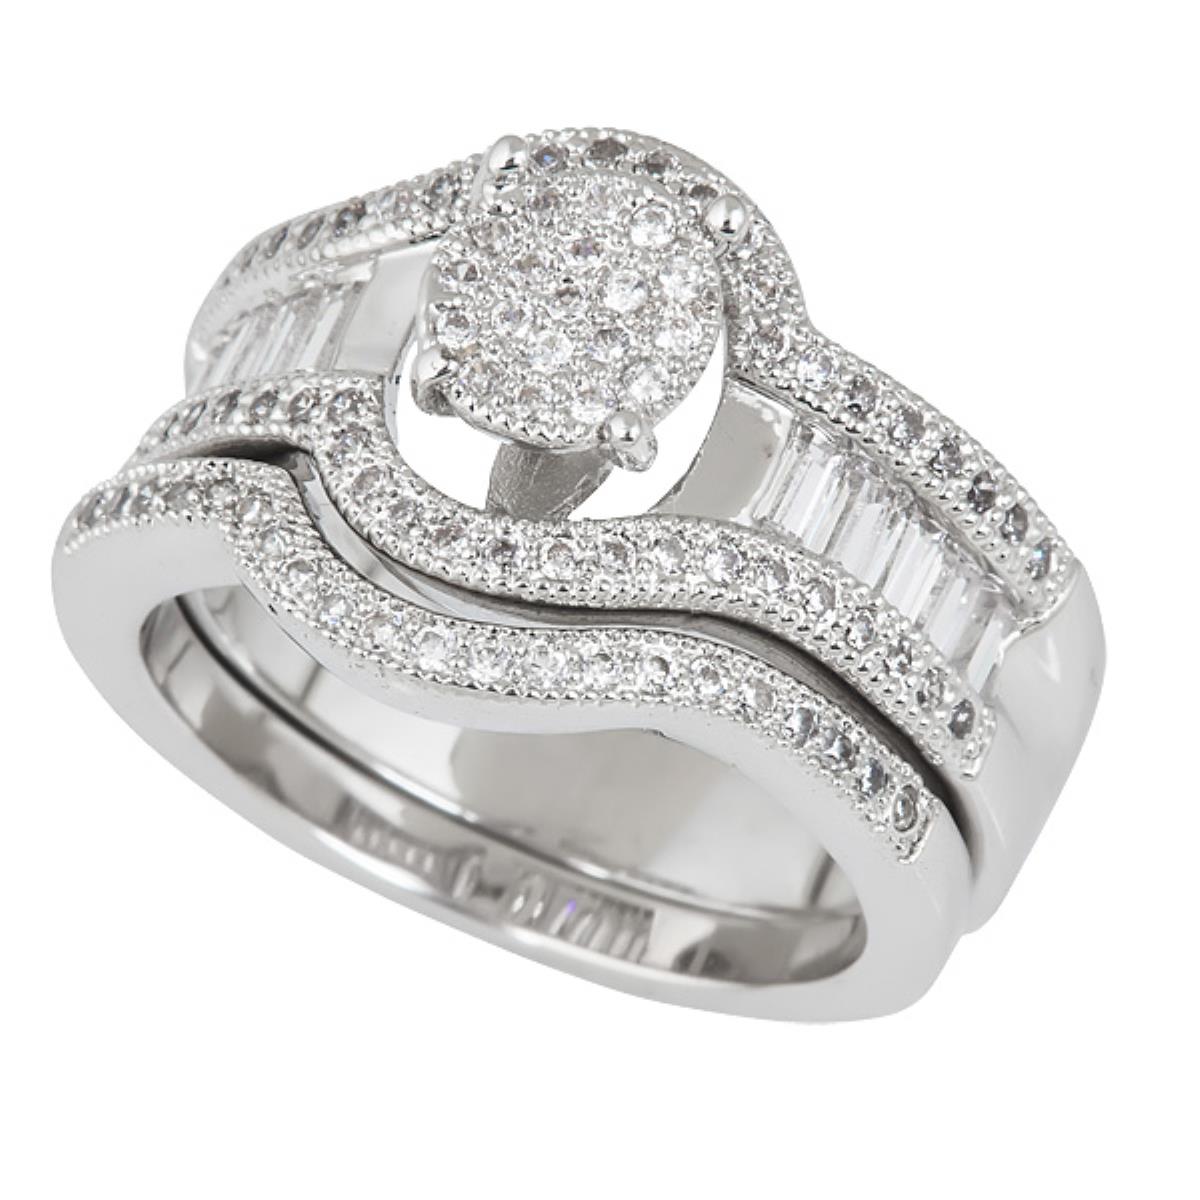 Sterling Silver Baquette Micropave Round Cut Halo and  Baguette Wedding Set with Cubic Zirconia